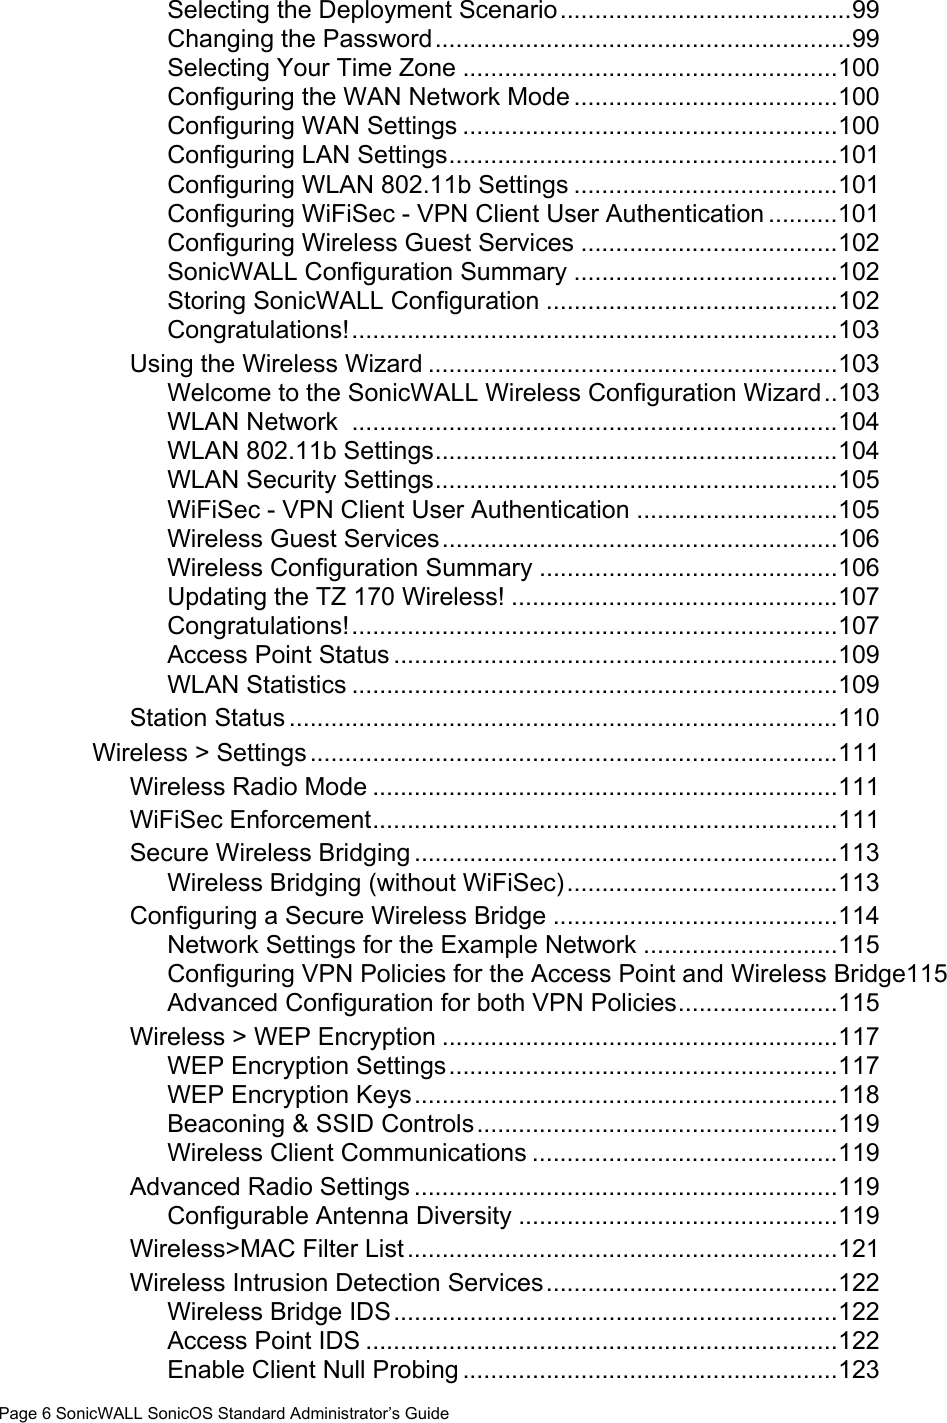 Page 6 SonicWALL SonicOS Standard Administrator’s GuideSelecting the Deployment Scenario..........................................99Changing the Password............................................................99Selecting Your Time Zone ......................................................100Configuring the WAN Network Mode ......................................100Configuring WAN Settings ......................................................100Configuring LAN Settings........................................................101Configuring WLAN 802.11b Settings ......................................101Configuring WiFiSec - VPN Client User Authentication ..........101Configuring Wireless Guest Services .....................................102SonicWALL Configuration Summary ......................................102Storing SonicWALL Configuration ..........................................102Congratulations!......................................................................103Using the Wireless Wizard ...........................................................103Welcome to the SonicWALL Wireless Configuration Wizard..103WLAN Network  ......................................................................104WLAN 802.11b Settings..........................................................104WLAN Security Settings..........................................................105WiFiSec - VPN Client User Authentication .............................105Wireless Guest Services.........................................................106Wireless Configuration Summary ...........................................106Updating the TZ 170 Wireless! ...............................................107Congratulations!......................................................................107Access Point Status ................................................................109WLAN Statistics ......................................................................109Station Status ...............................................................................110Wireless &gt; Settings............................................................................111Wireless Radio Mode ...................................................................111WiFiSec Enforcement...................................................................111Secure Wireless Bridging .............................................................113Wireless Bridging (without WiFiSec).......................................113Configuring a Secure Wireless Bridge .........................................114Network Settings for the Example Network ............................115Configuring VPN Policies for the Access Point and Wireless Bridge115Advanced Configuration for both VPN Policies.......................115Wireless &gt; WEP Encryption .........................................................117WEP Encryption Settings........................................................117WEP Encryption Keys.............................................................118Beaconing &amp; SSID Controls....................................................119Wireless Client Communications ............................................119Advanced Radio Settings .............................................................119Configurable Antenna Diversity ..............................................119Wireless&gt;MAC Filter List ..............................................................121Wireless Intrusion Detection Services..........................................122Wireless Bridge IDS................................................................122Access Point IDS ....................................................................122Enable Client Null Probing ......................................................123